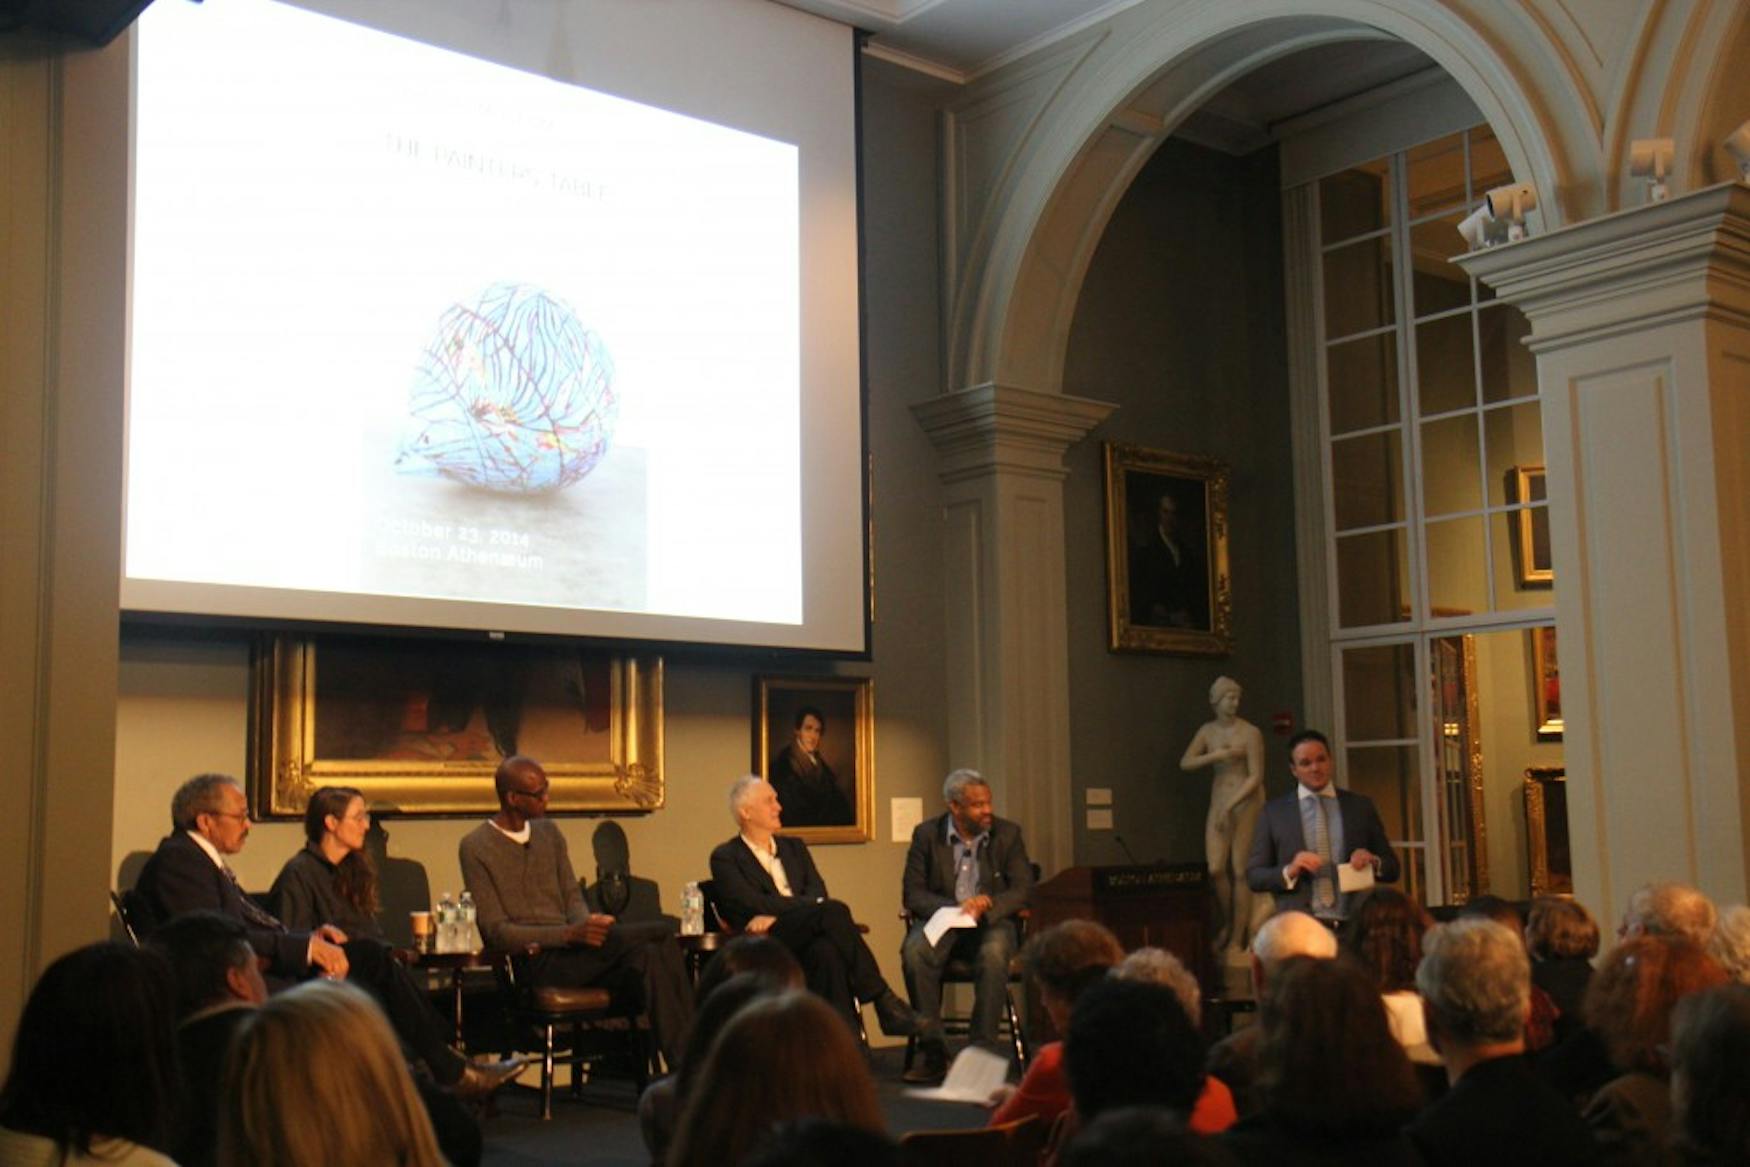 ARTISTS IN DIALOGUE: Four artists gathered at the Boston Athenaeum on Thursday evening for a panel talk as part of the symposium “Abstract and Otherwise.”